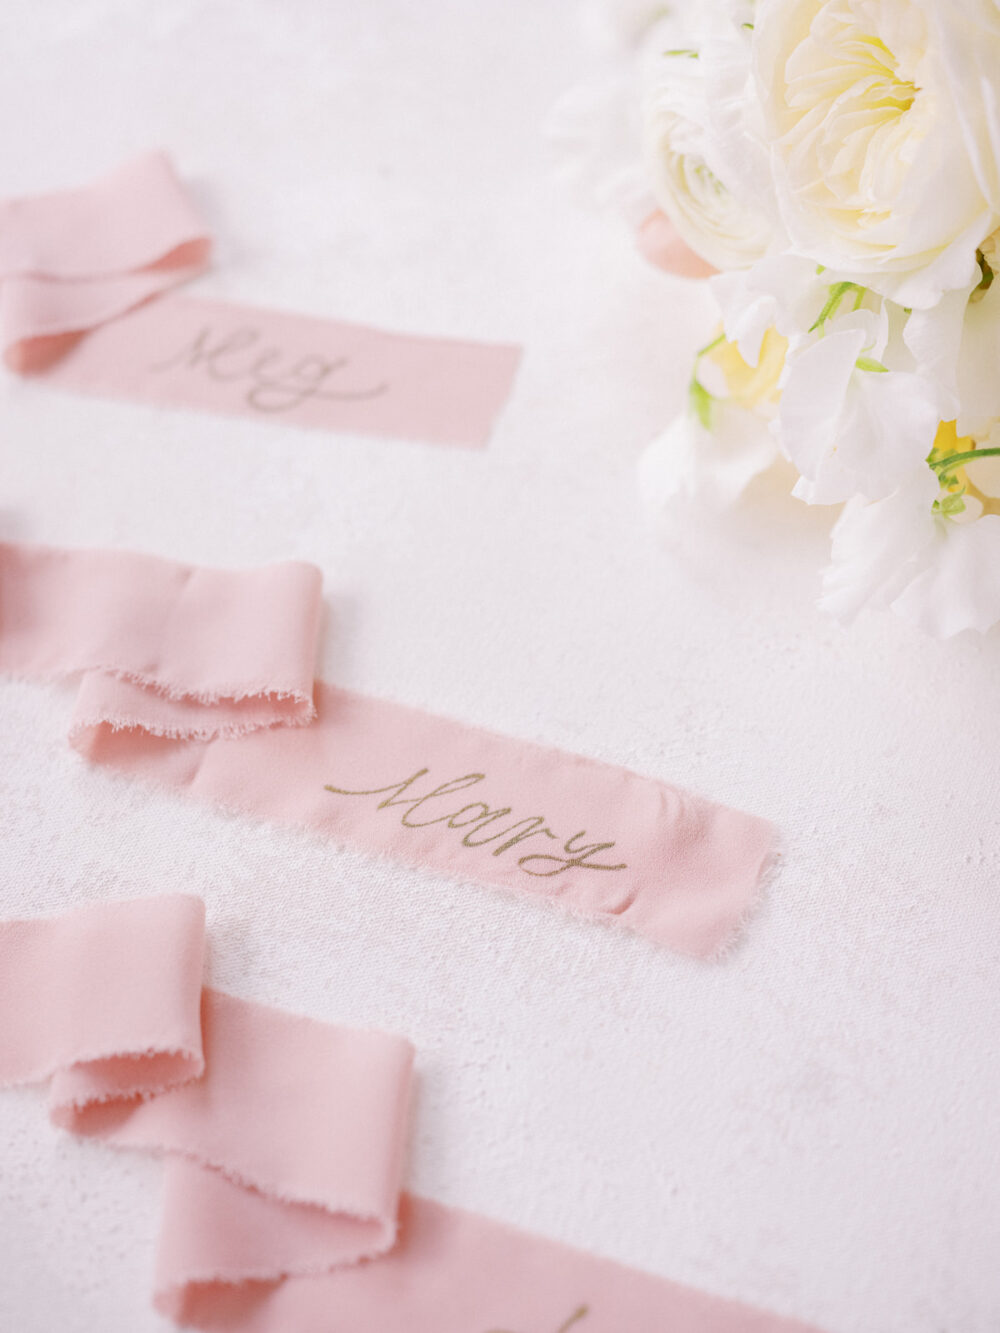 Calligraphy on a ribbon for wedding champagne